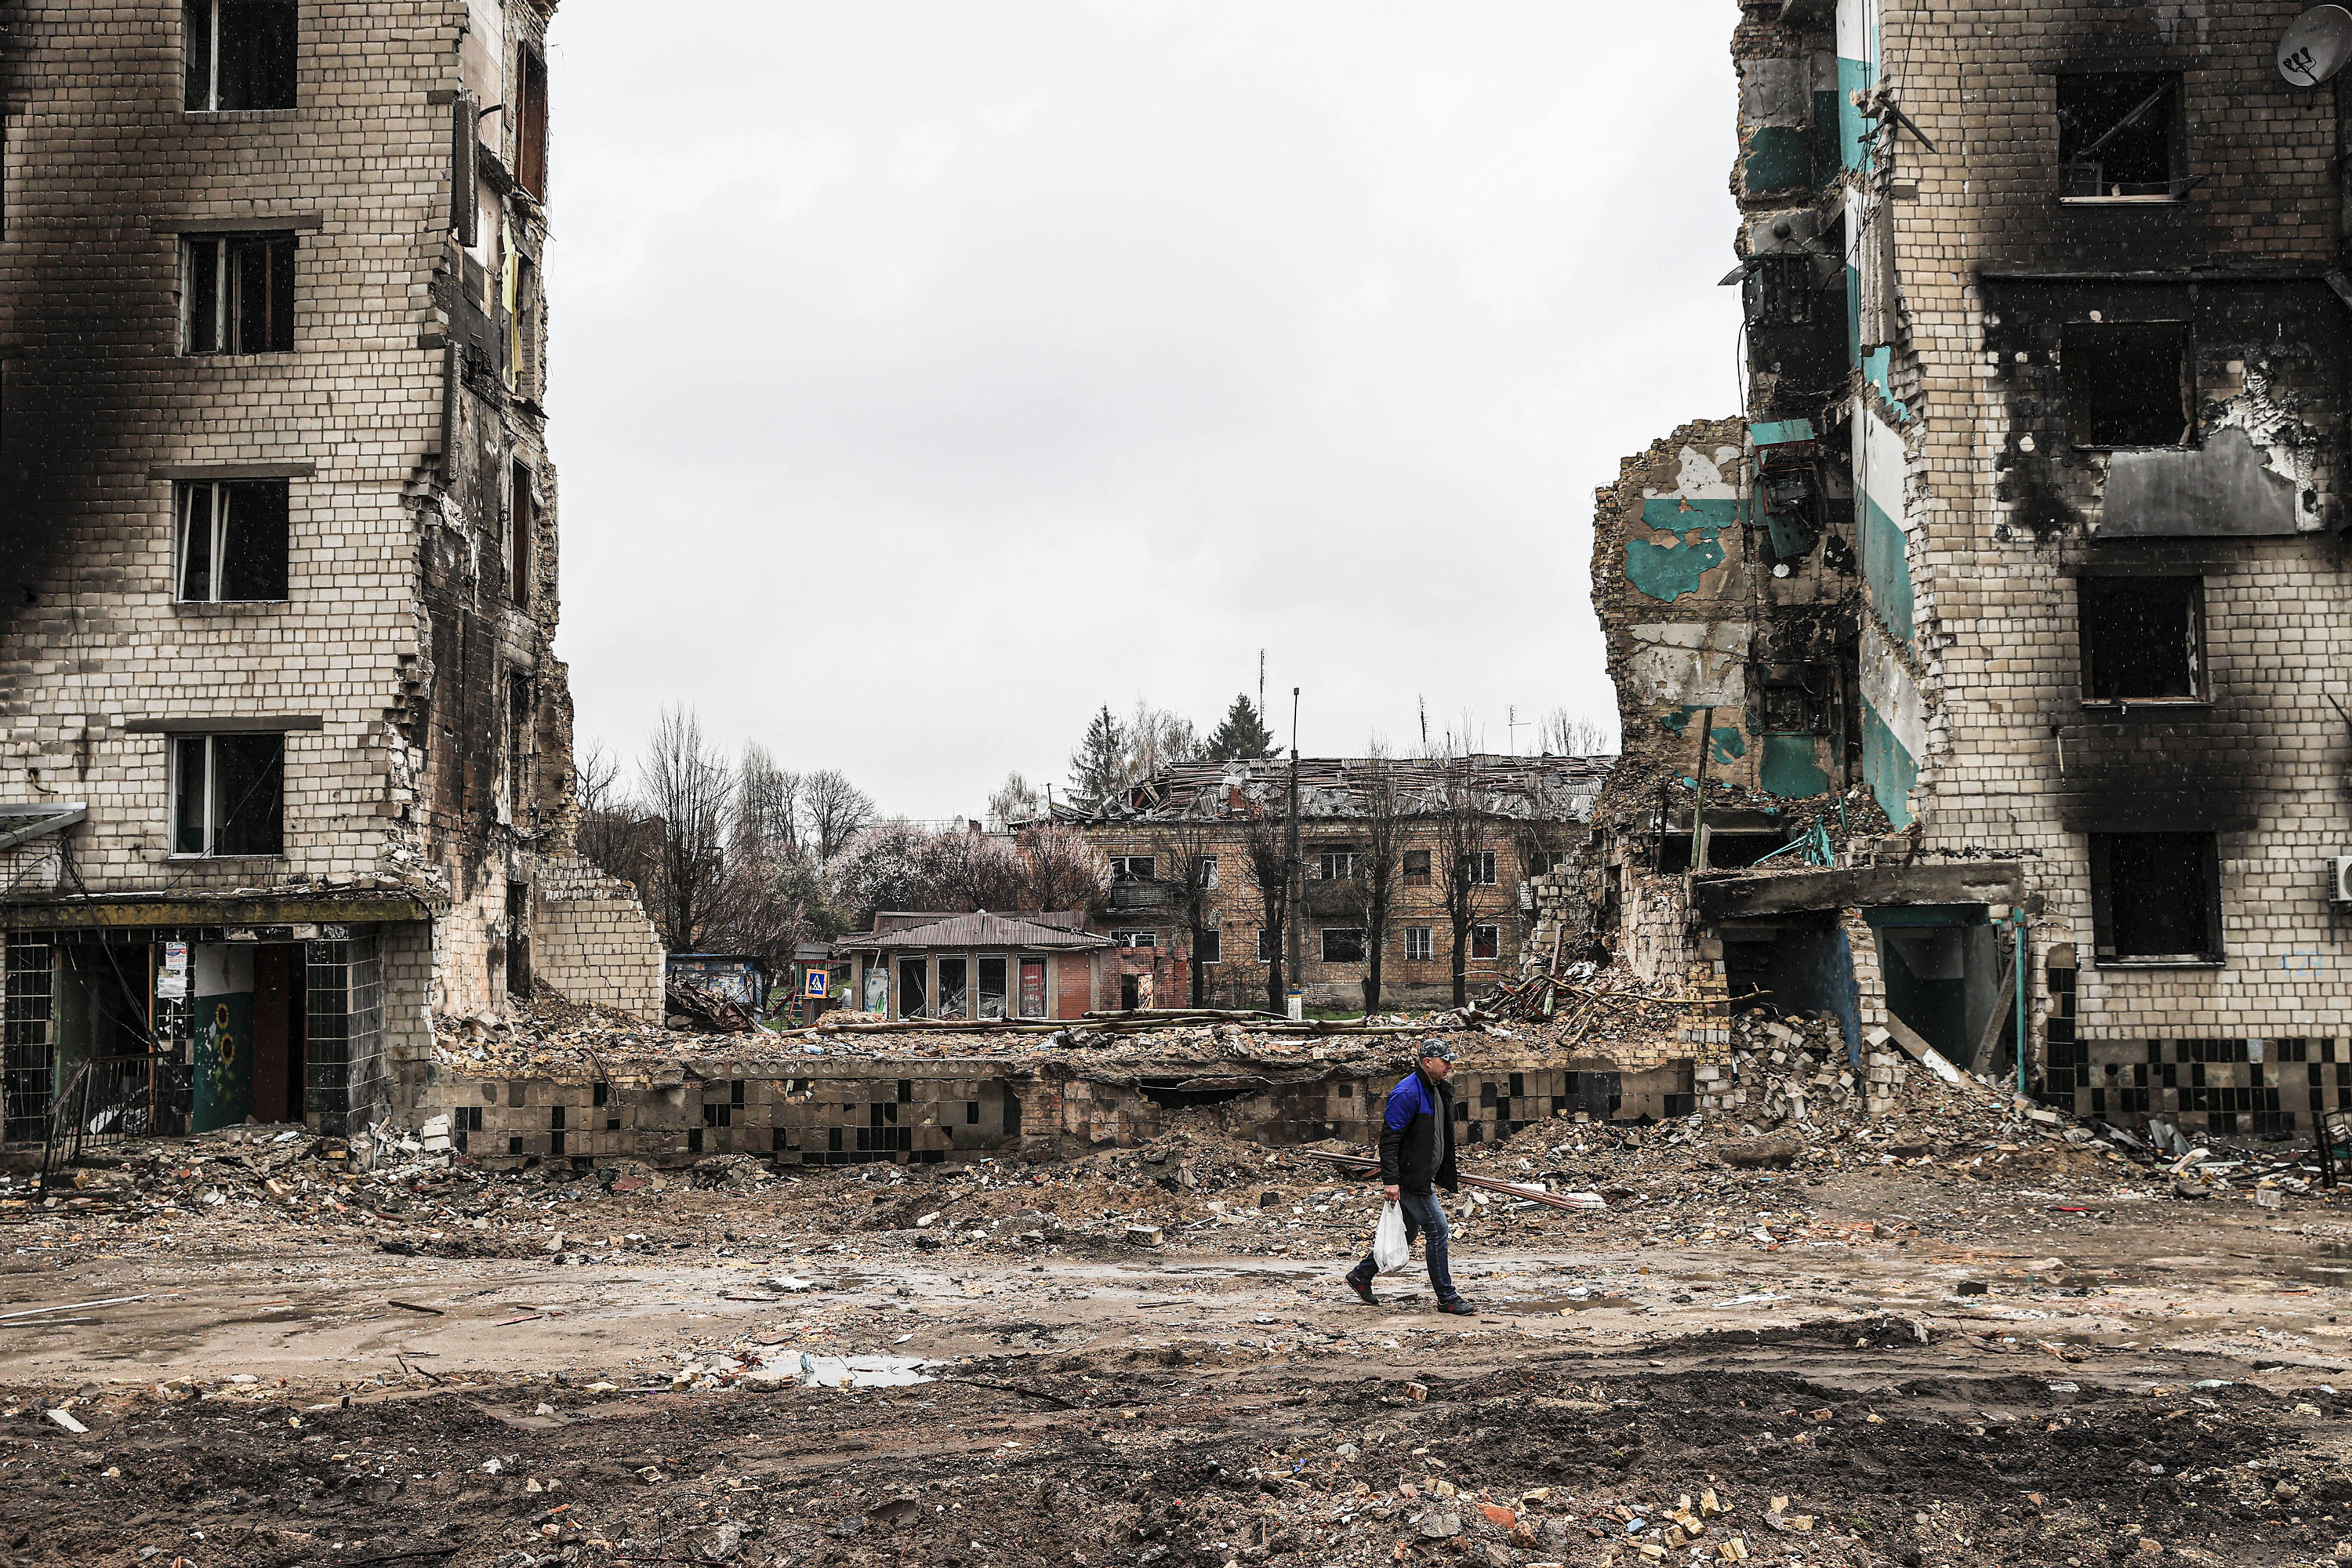 A Ukrainian person walks through the ruins of damaged buildings in Borodianka, on April 22, 2022.